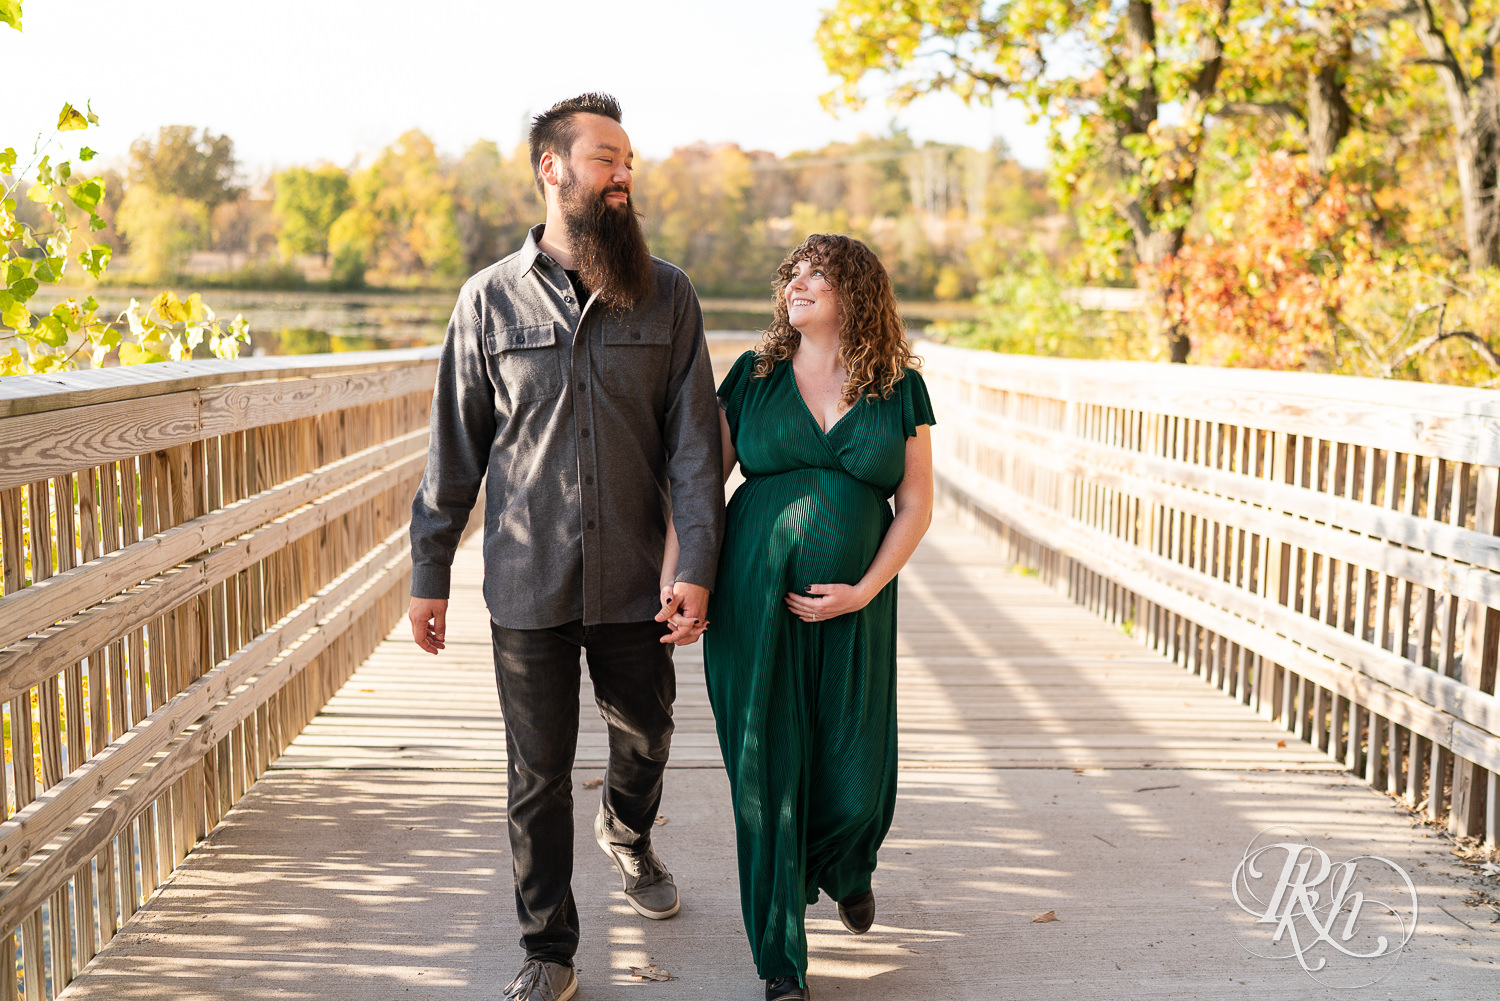 Pregnant woman in green dress and man hold belly and walk on bridge in Lebanon Hills Regional Park in Eagan, Minnesota.